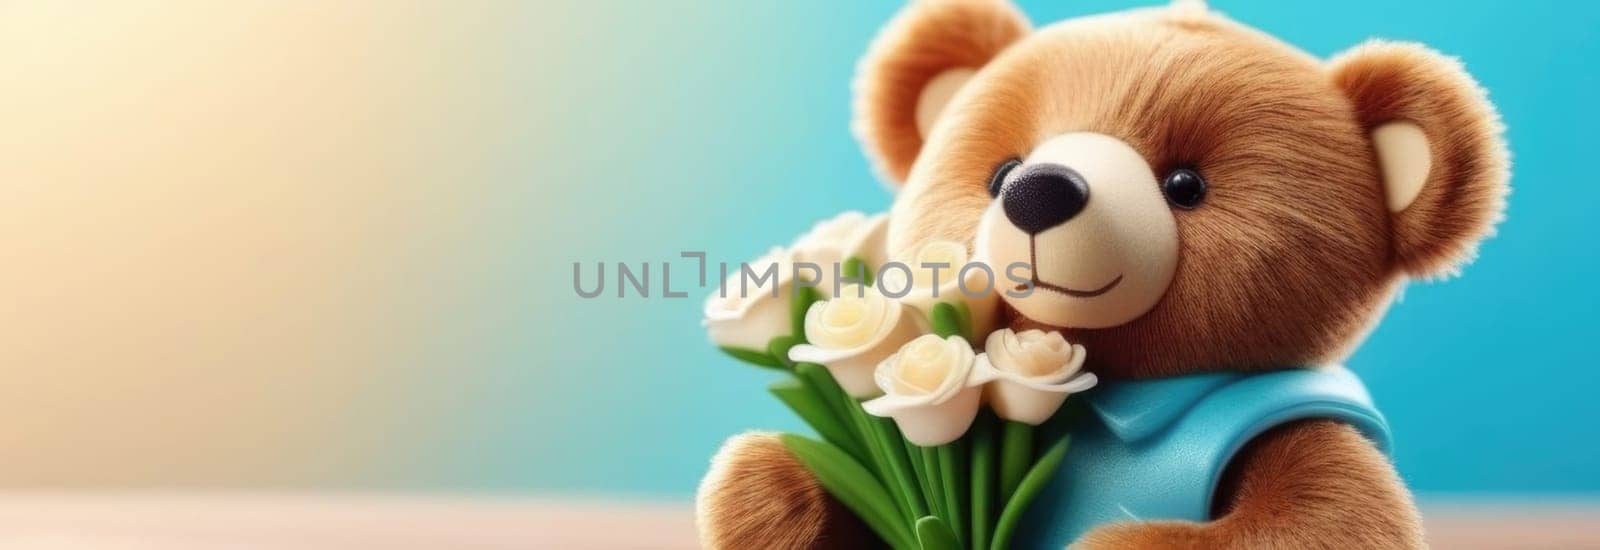 Teddy bear is holding bouquet of flowers isolated on pastel background. Concept of birthday and warmth, affection as teddy bear is symbol of love and comfort. Flowers add touch of beauty, color